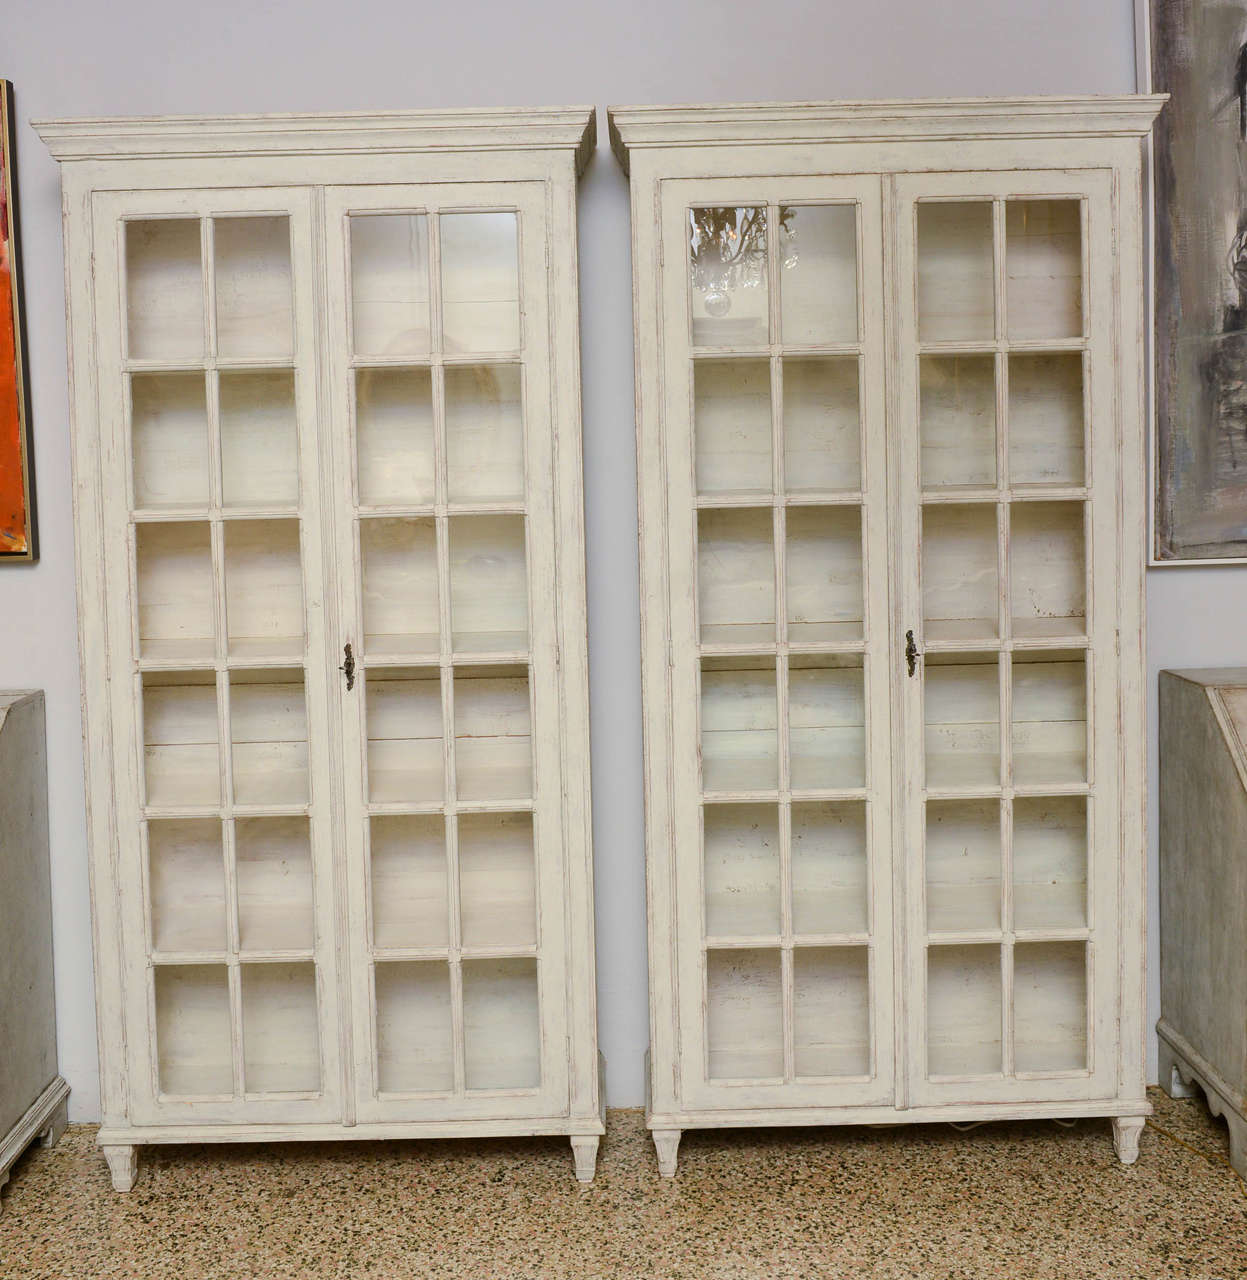 19th Century Pair of unusually large Swedish Antique Period Gustavian Book Cabinets with five shelves and original glass doors, locks and hinges; each glass panel is framed and simple but elegant square medallion is carved at each centre junction of